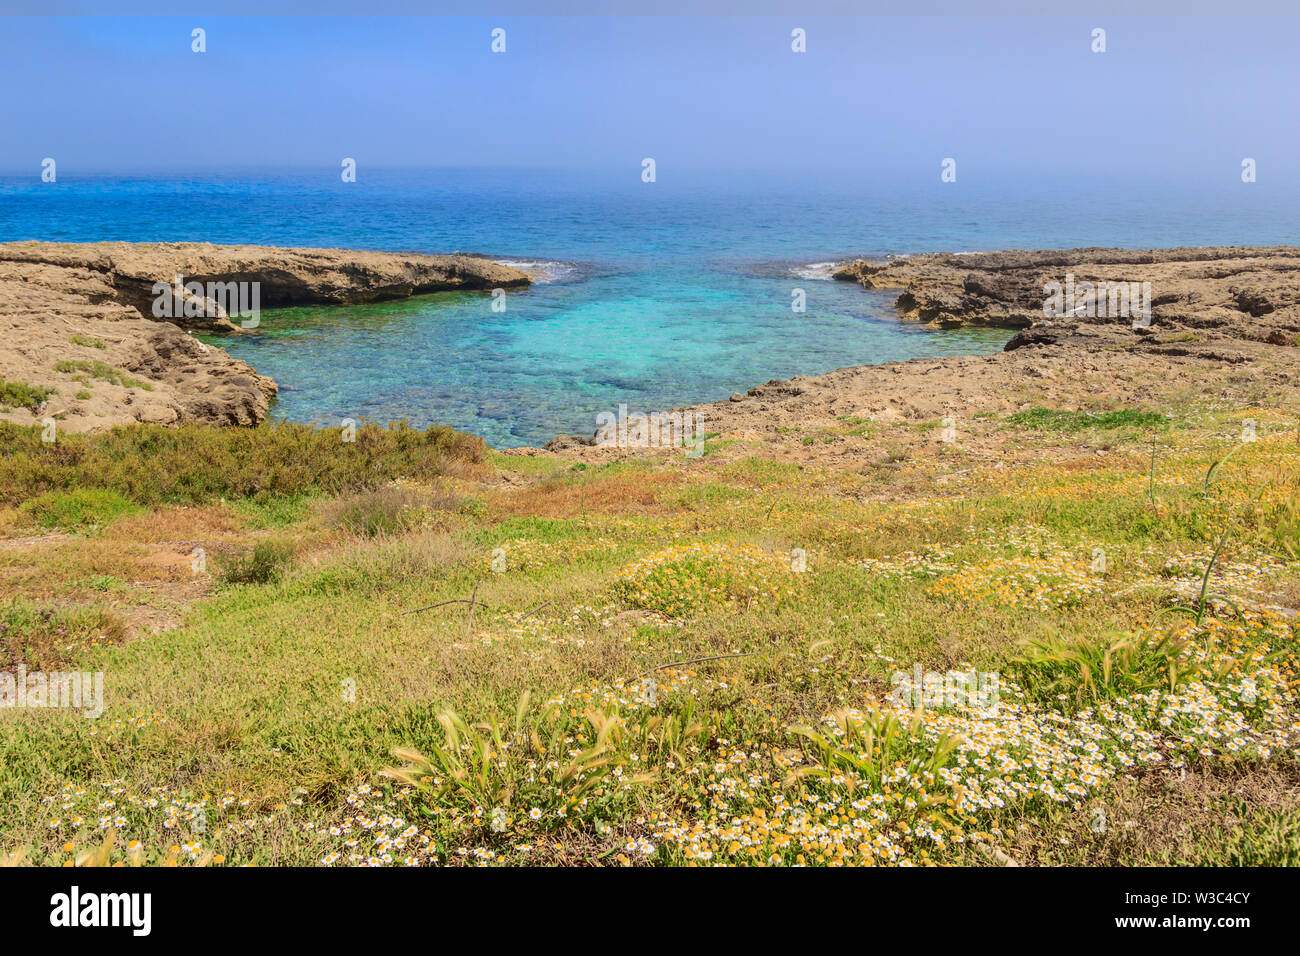 Torre Guaceto Nature Reserve: a nature sanctuary between the land and the sea.Italy (Apulia). Stock Photo